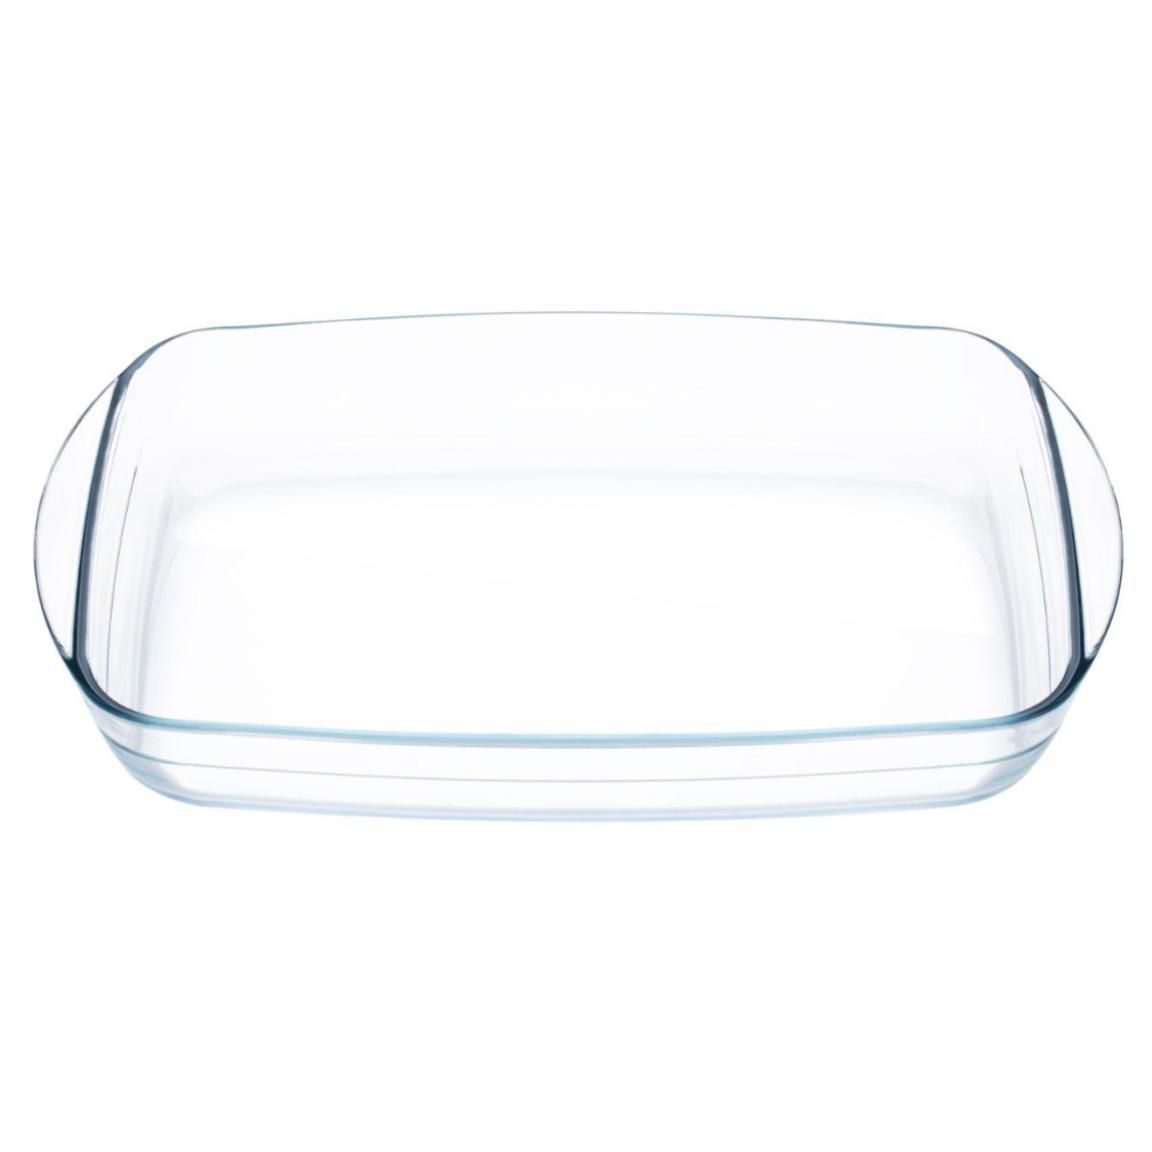 Rubbermaid DuraLite 10 In. Square Glass Baking Dish with Lid